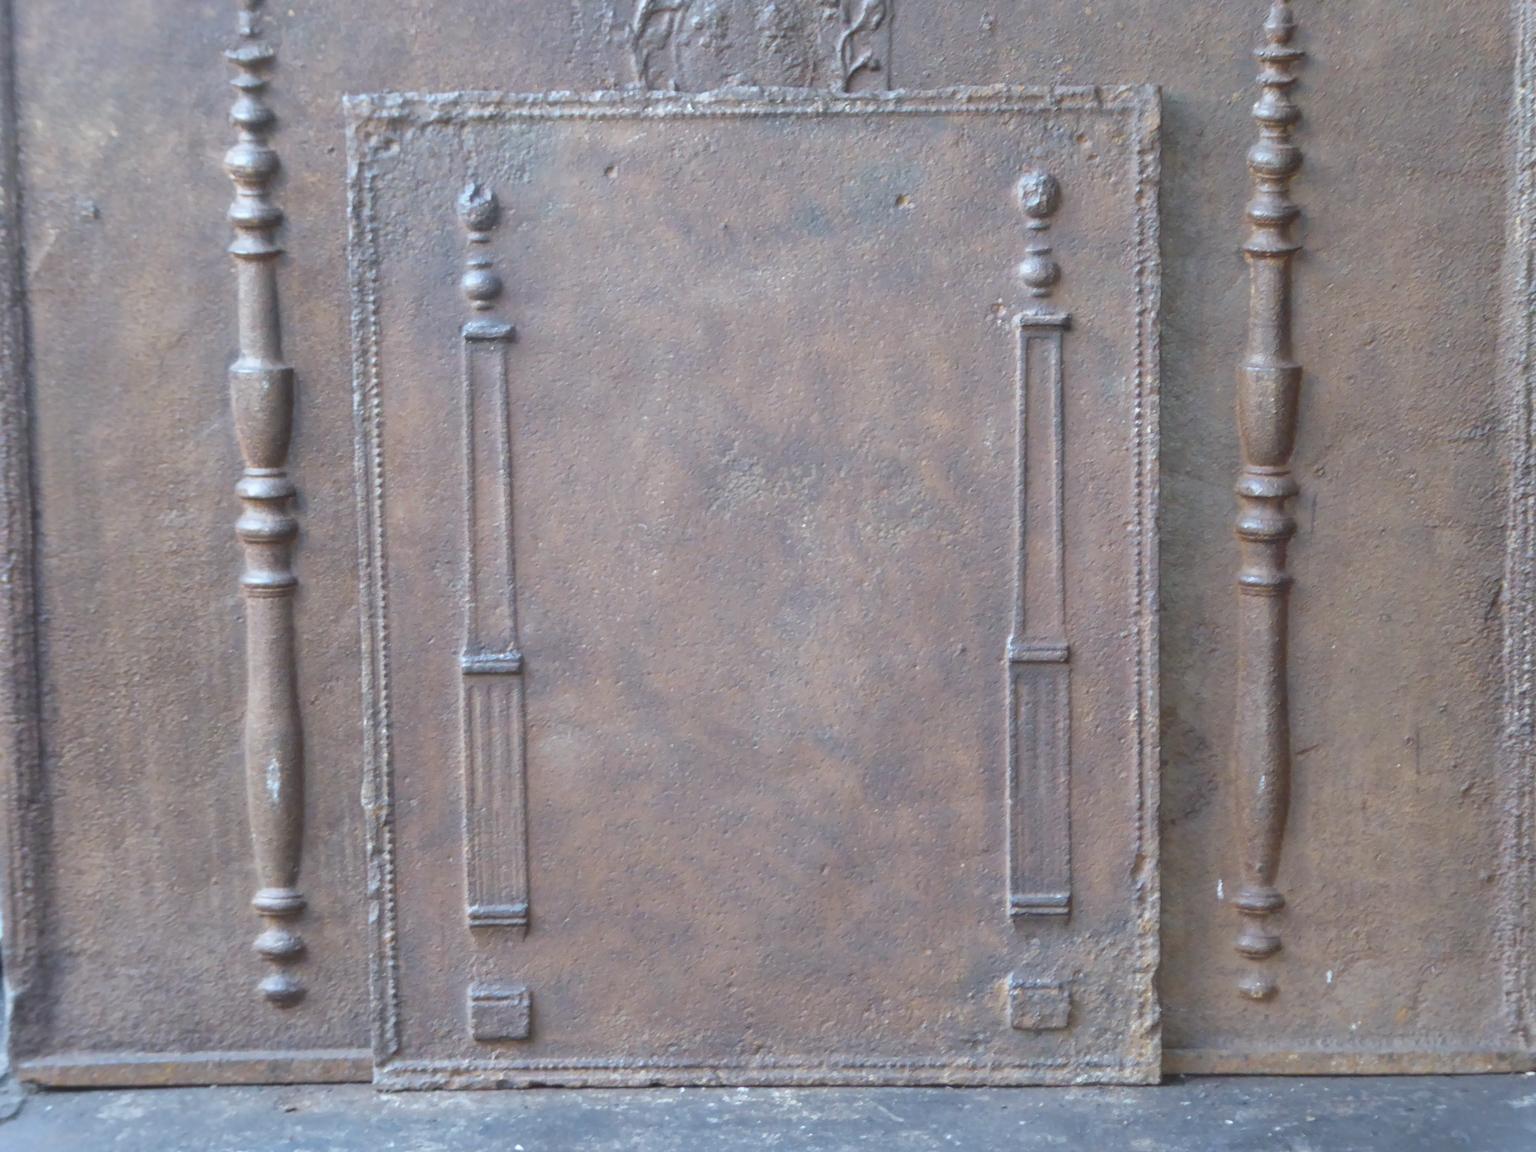 19th century French neoclassical fireback with two pillars of freedom. The pillars symbolize the value liberty, one of the three values of the French revolution. 

The fireback is made of cast iron and has a natural brown patina. Upon request it